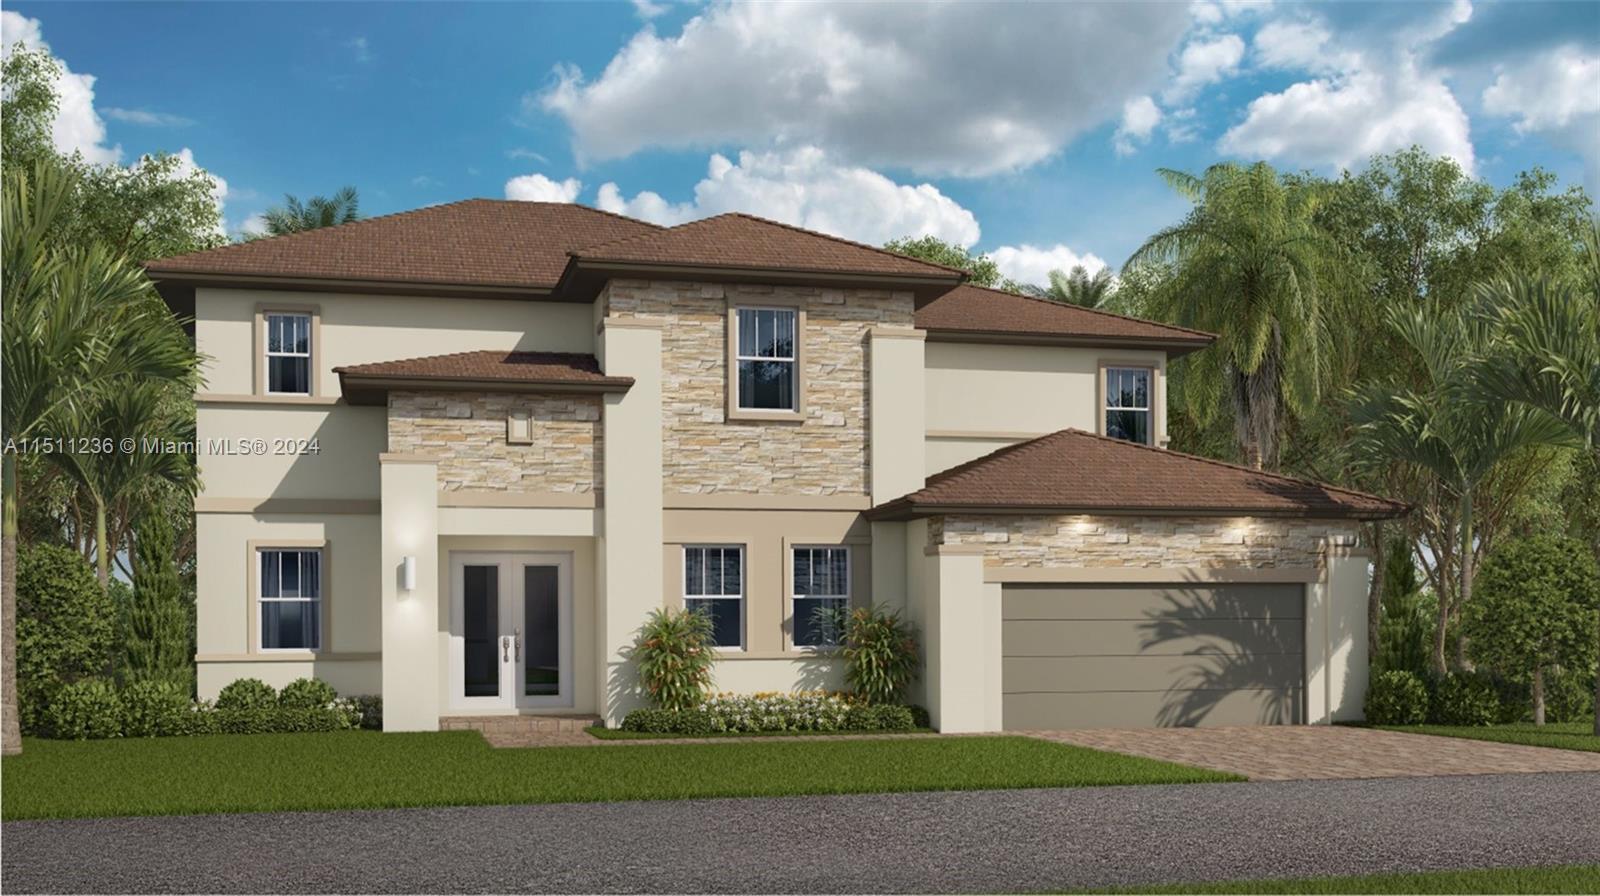 Property for Sale at 4385 123 Ln, Southwest Ranches, Broward County, Florida - Bedrooms: 4 
Bathrooms: 3  - $1,232,000